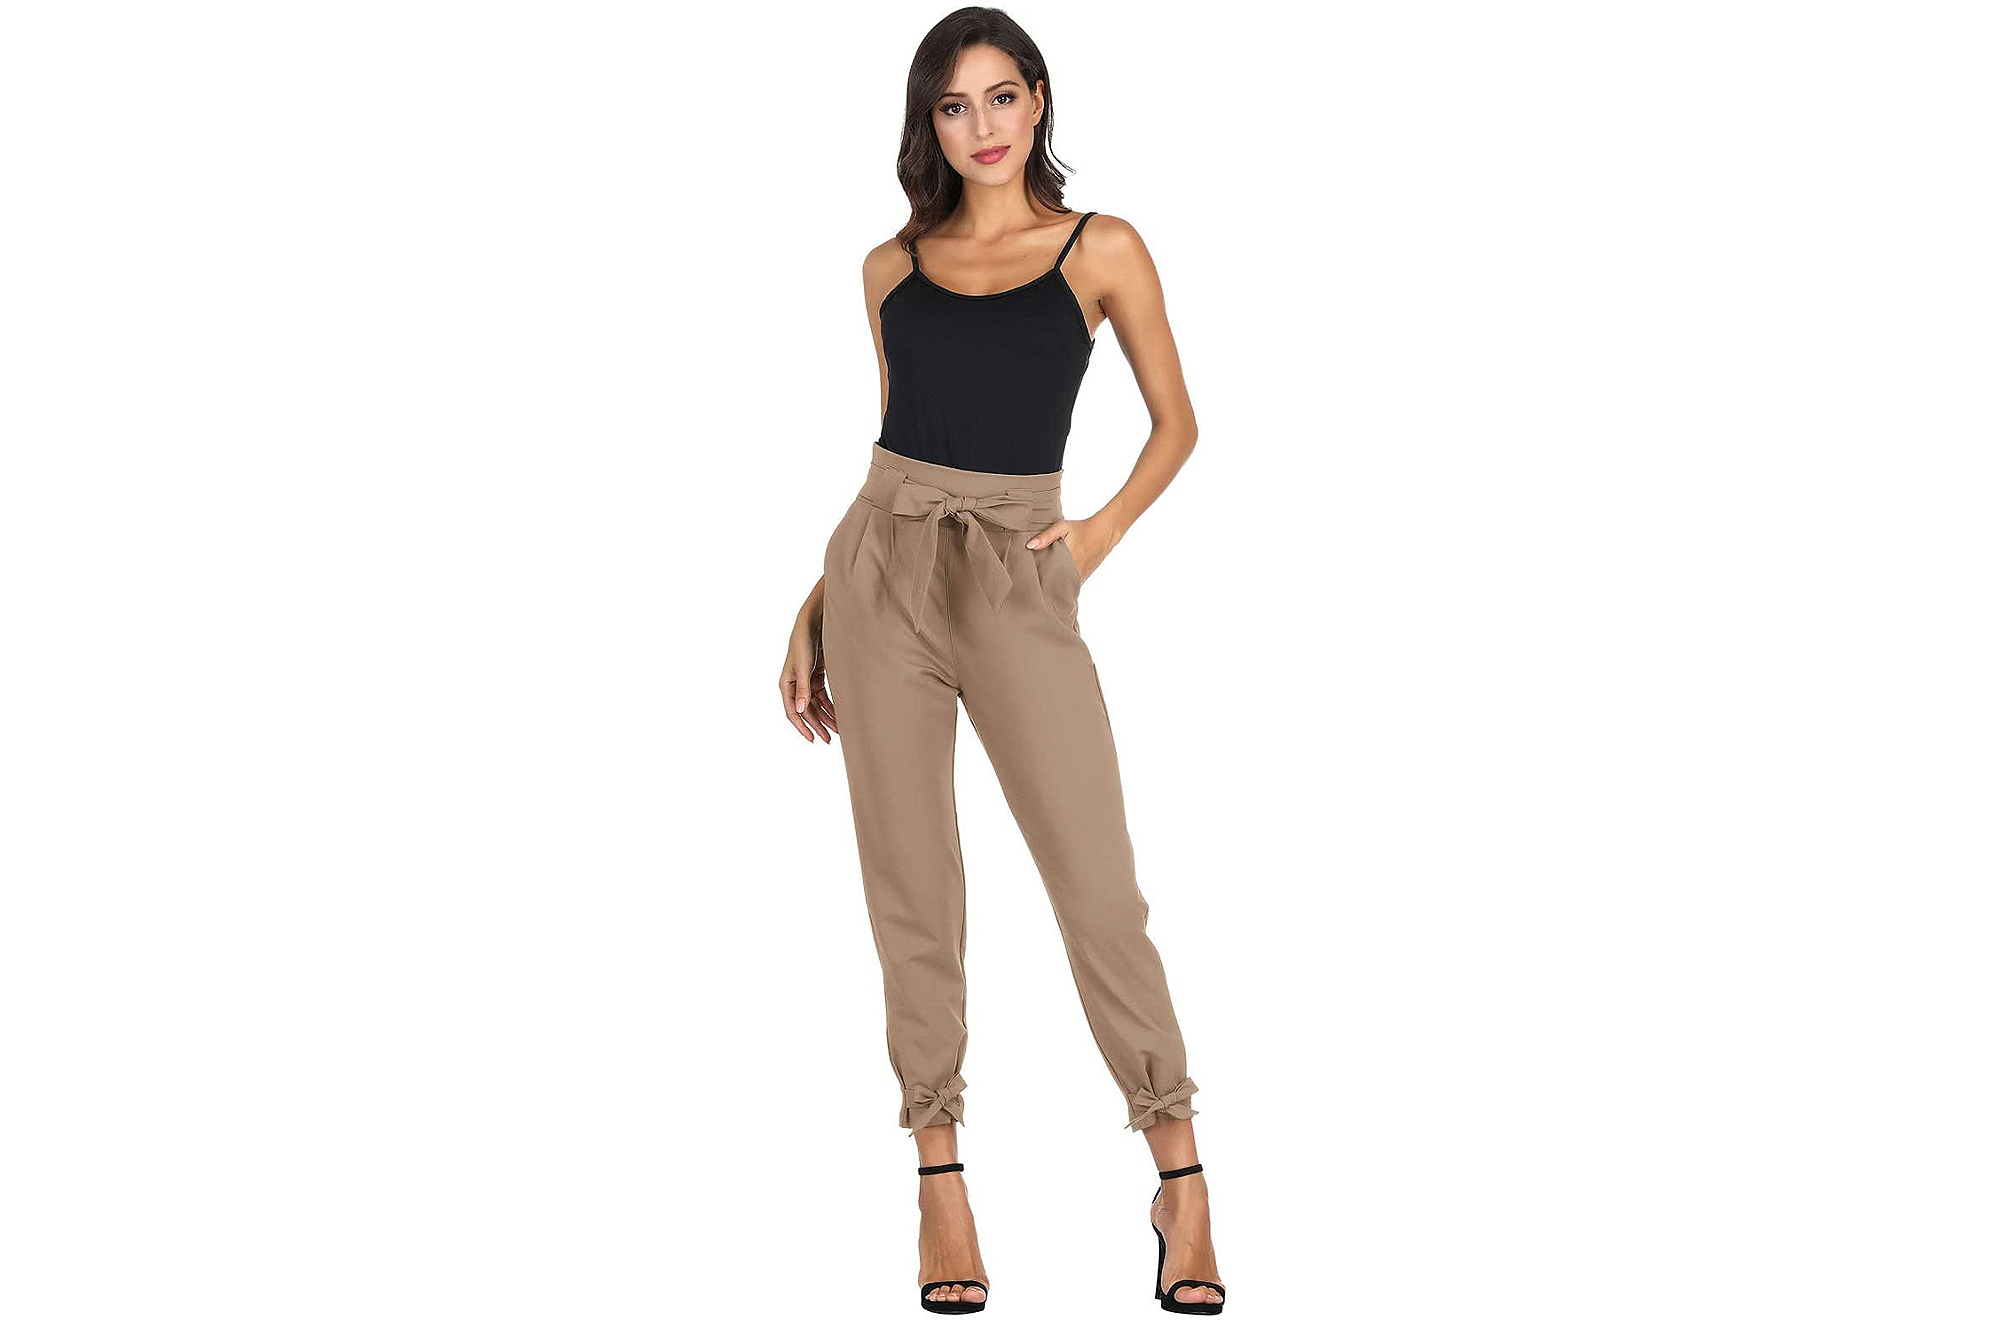 Grace Karin Pants Are Your New Favorite Everyday Pants